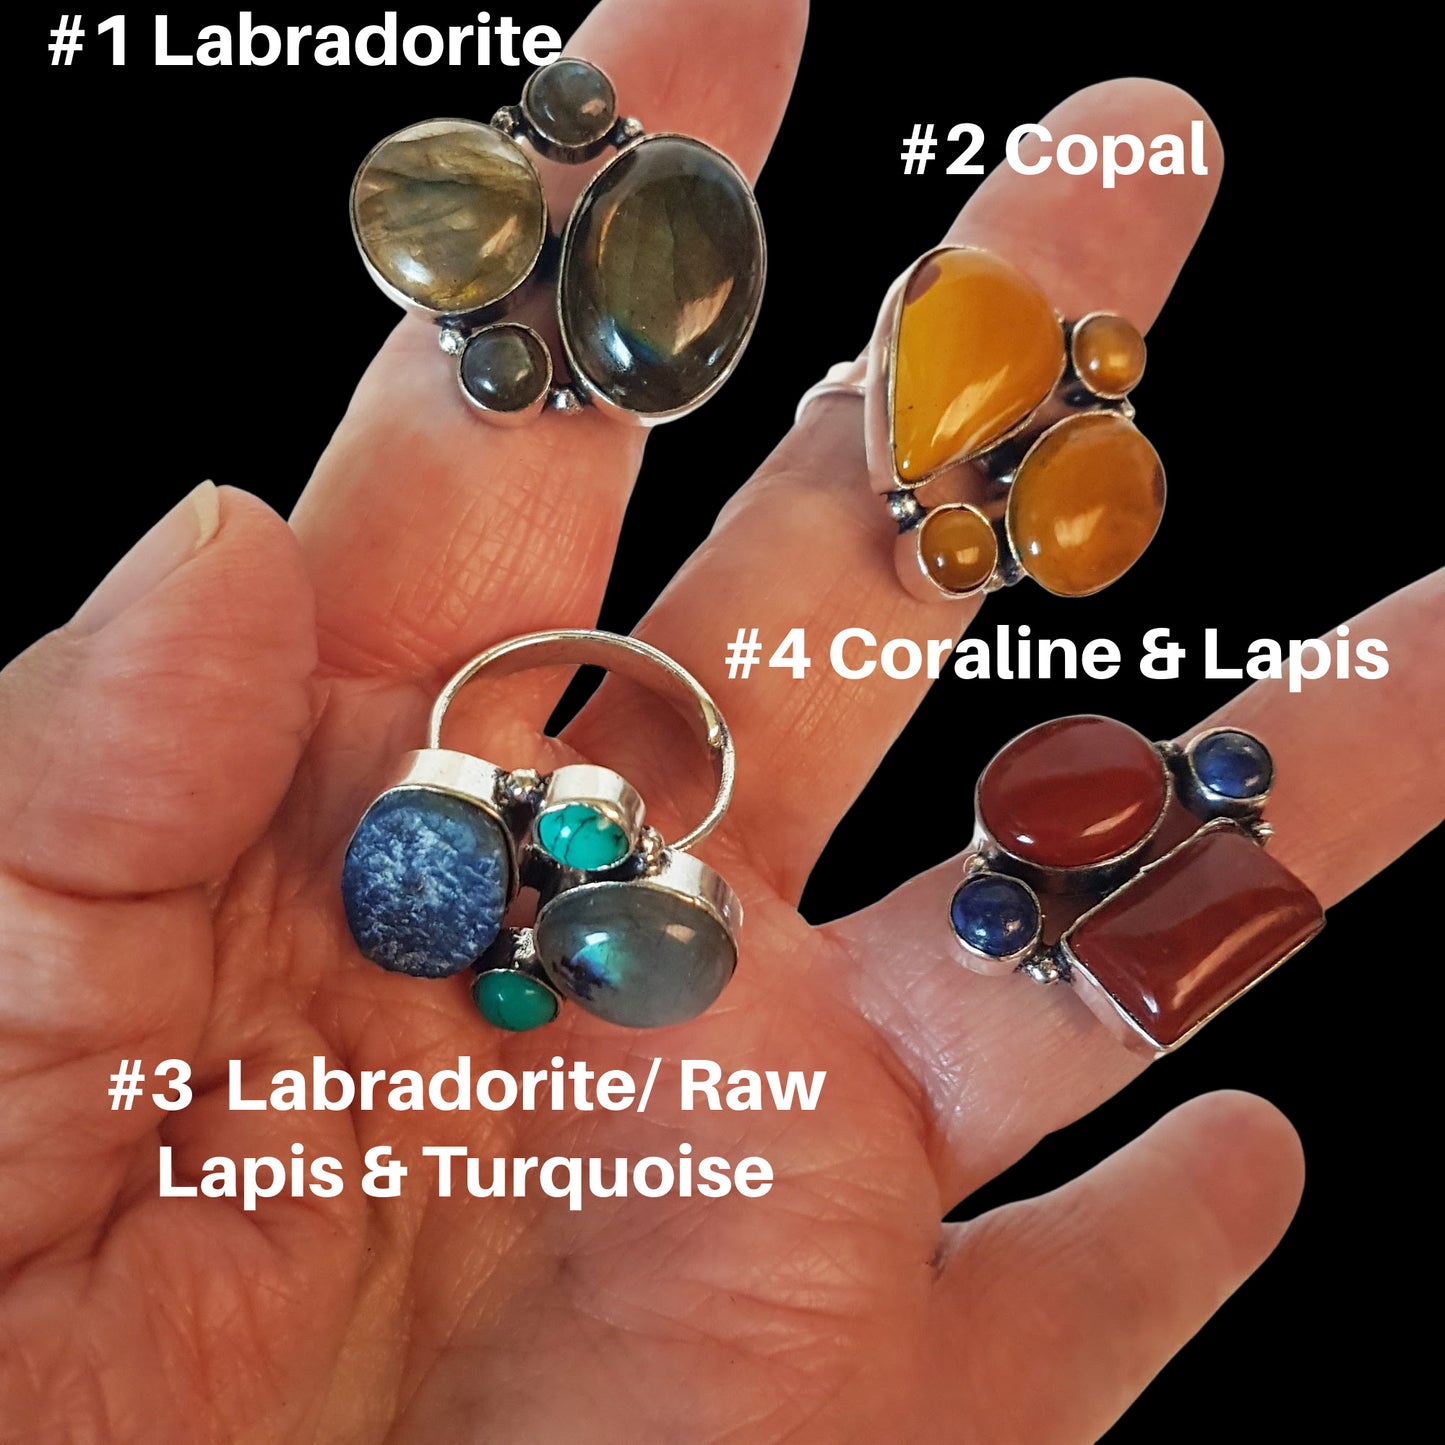 Gemstone Cluster Art Rings adjustable size. One of a kind rings with semi precious stones in asymetrical settings. Comfortable to wear.